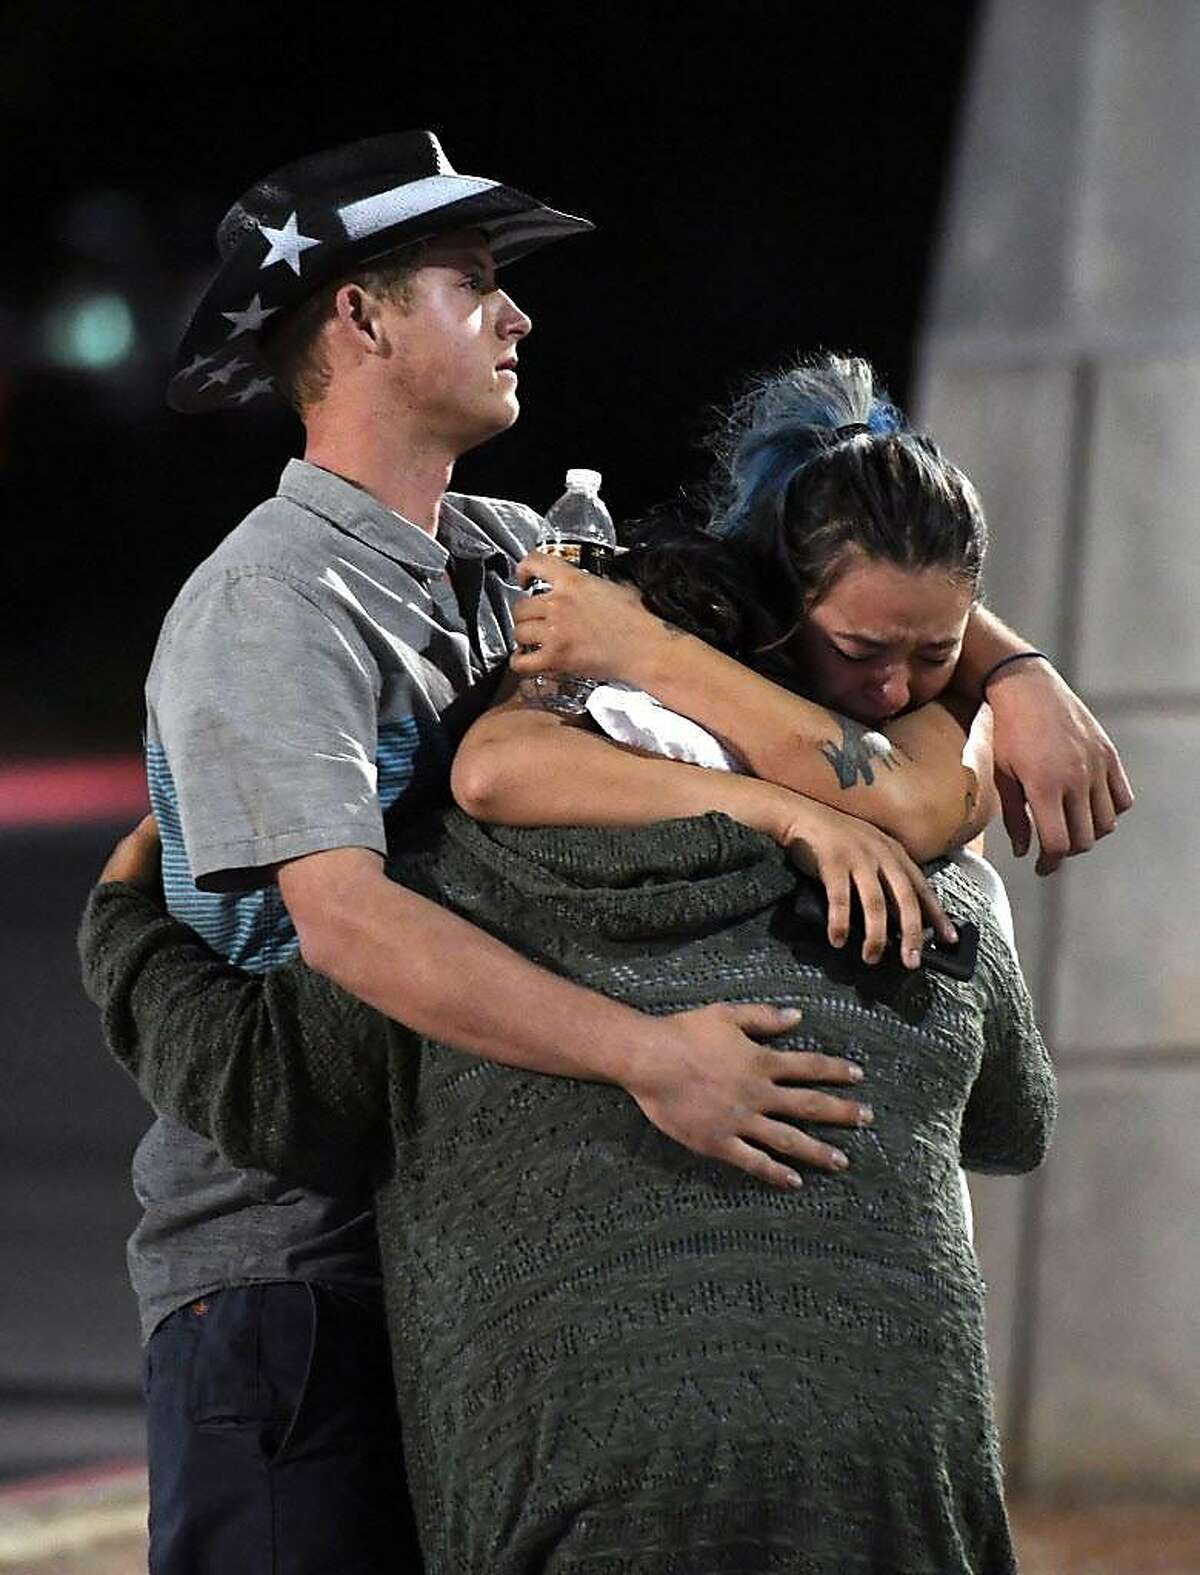 People hug and cry outside the Thomas & Mack Center after a mass shooting at the Route 91 Harvest country music festival on October 2, 2017 in Las Vegas, Nevada. A gunman, identified as Stephen Paddock, 64, of Mesquite, Nevada, opened fire from the Mandalay Bay Resort and Casino on the music festival, leaving at least 50 people dead and hundreds injured.